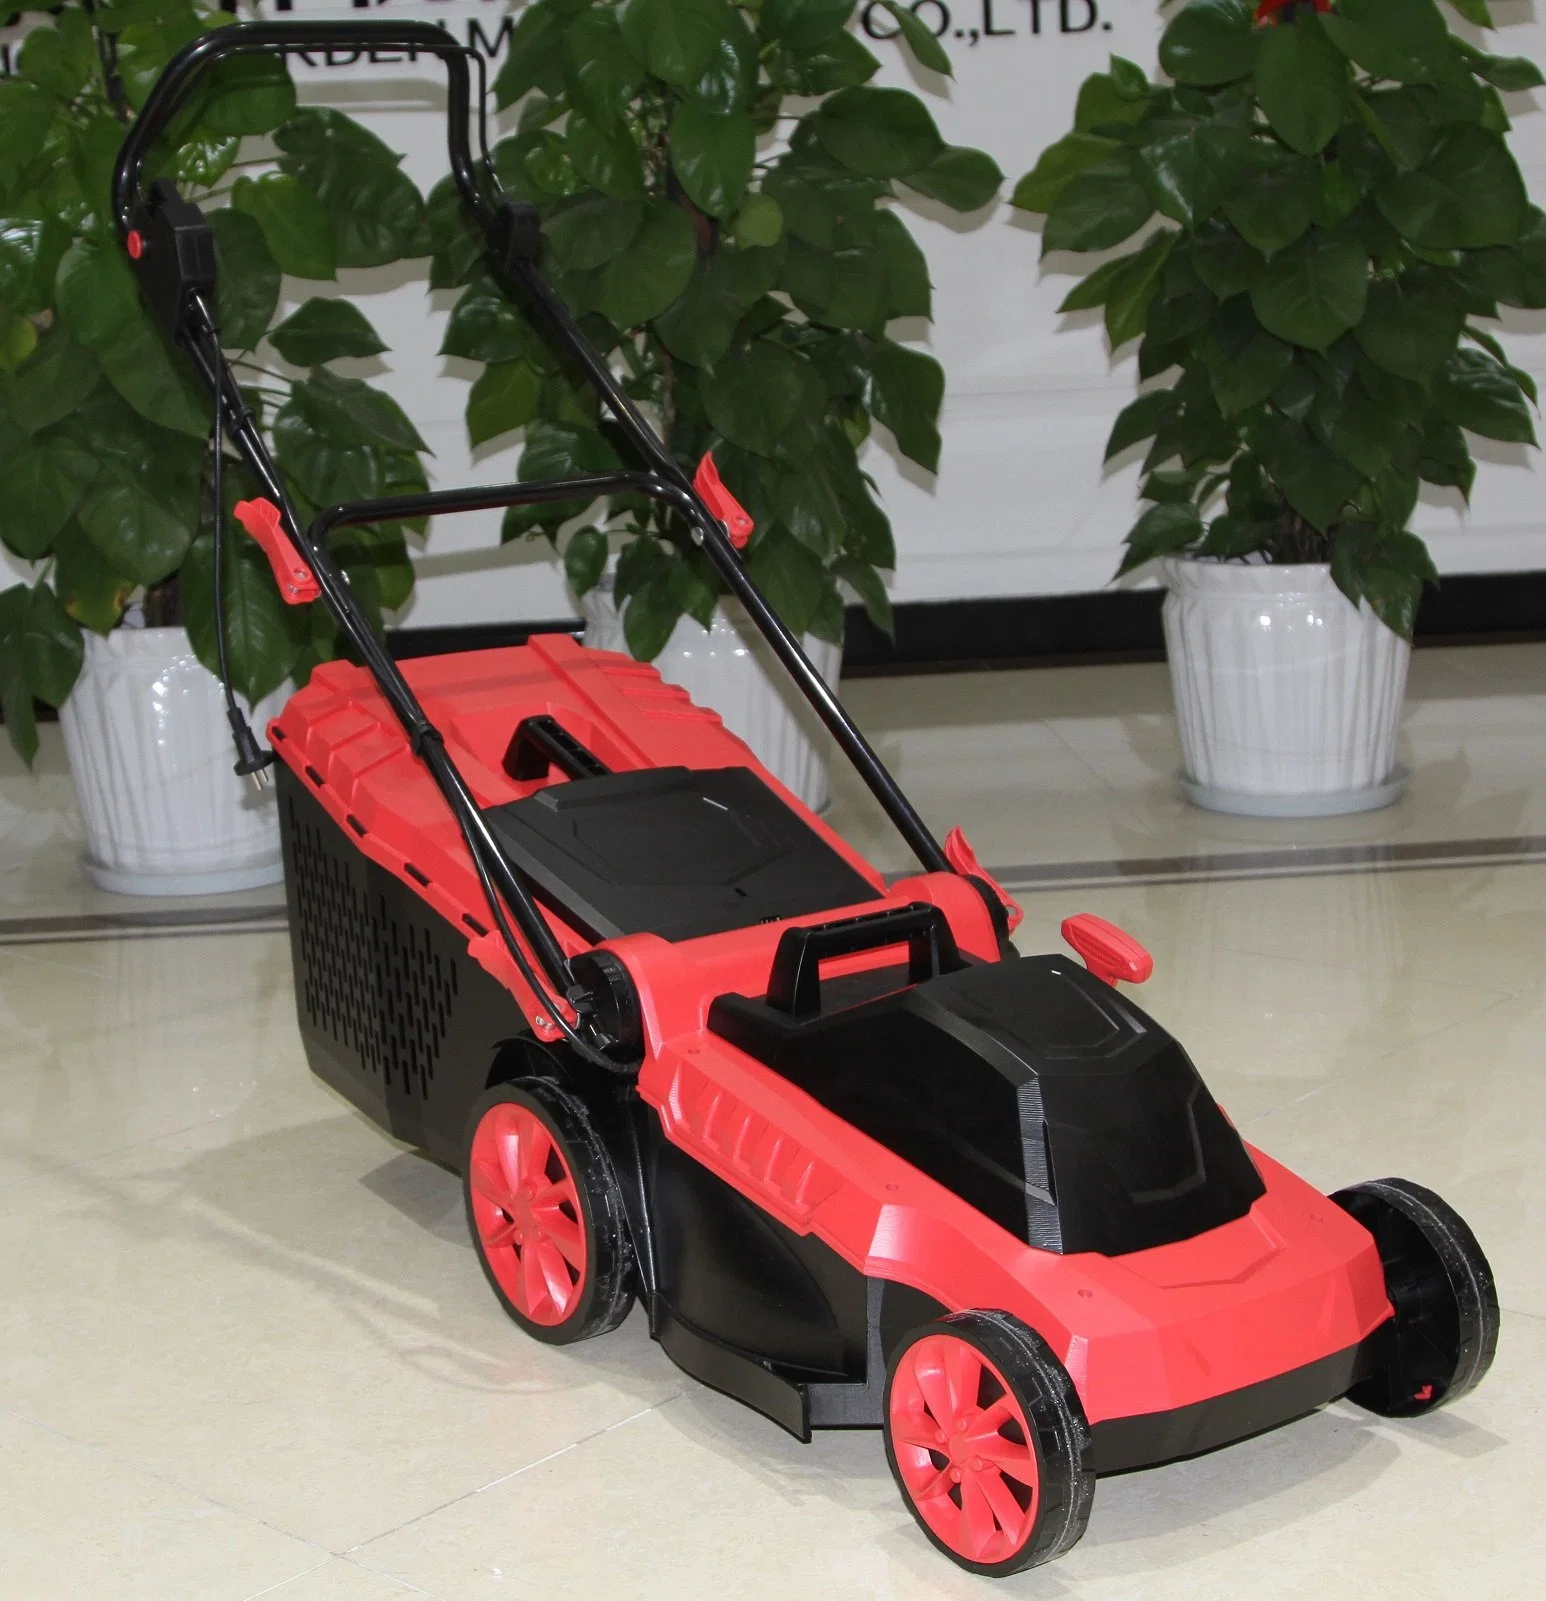 New Latest-Professional Design-380mm Grass-Cutting Size-Electric Garden-Power Tool Machines-Lawnmower